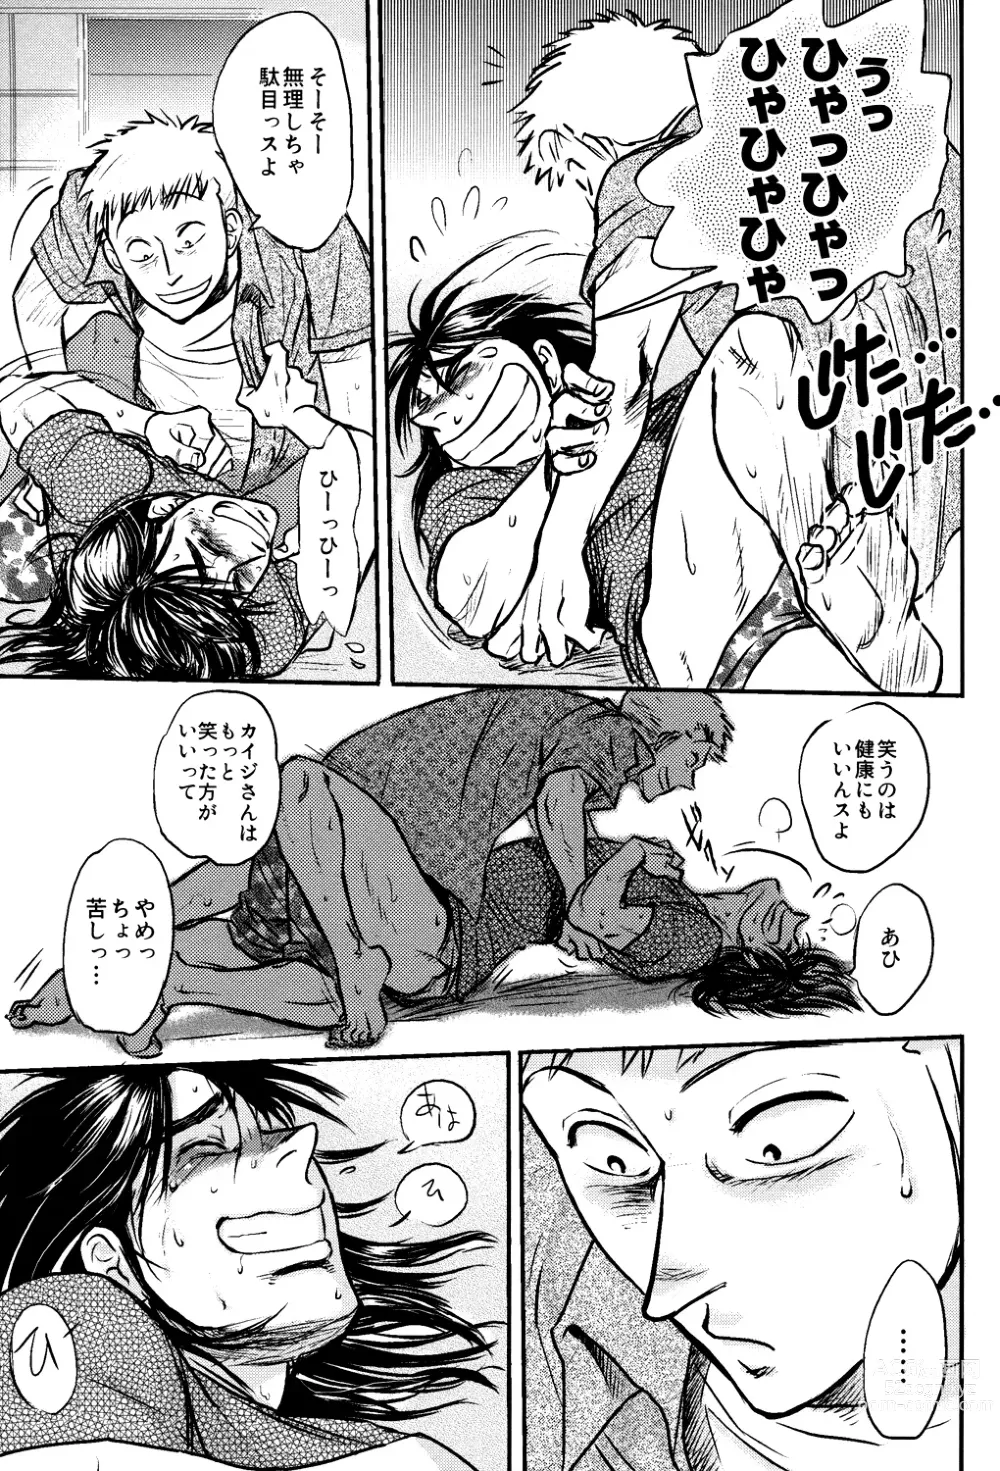 Page 24 of doujinshi Get Up Boys!